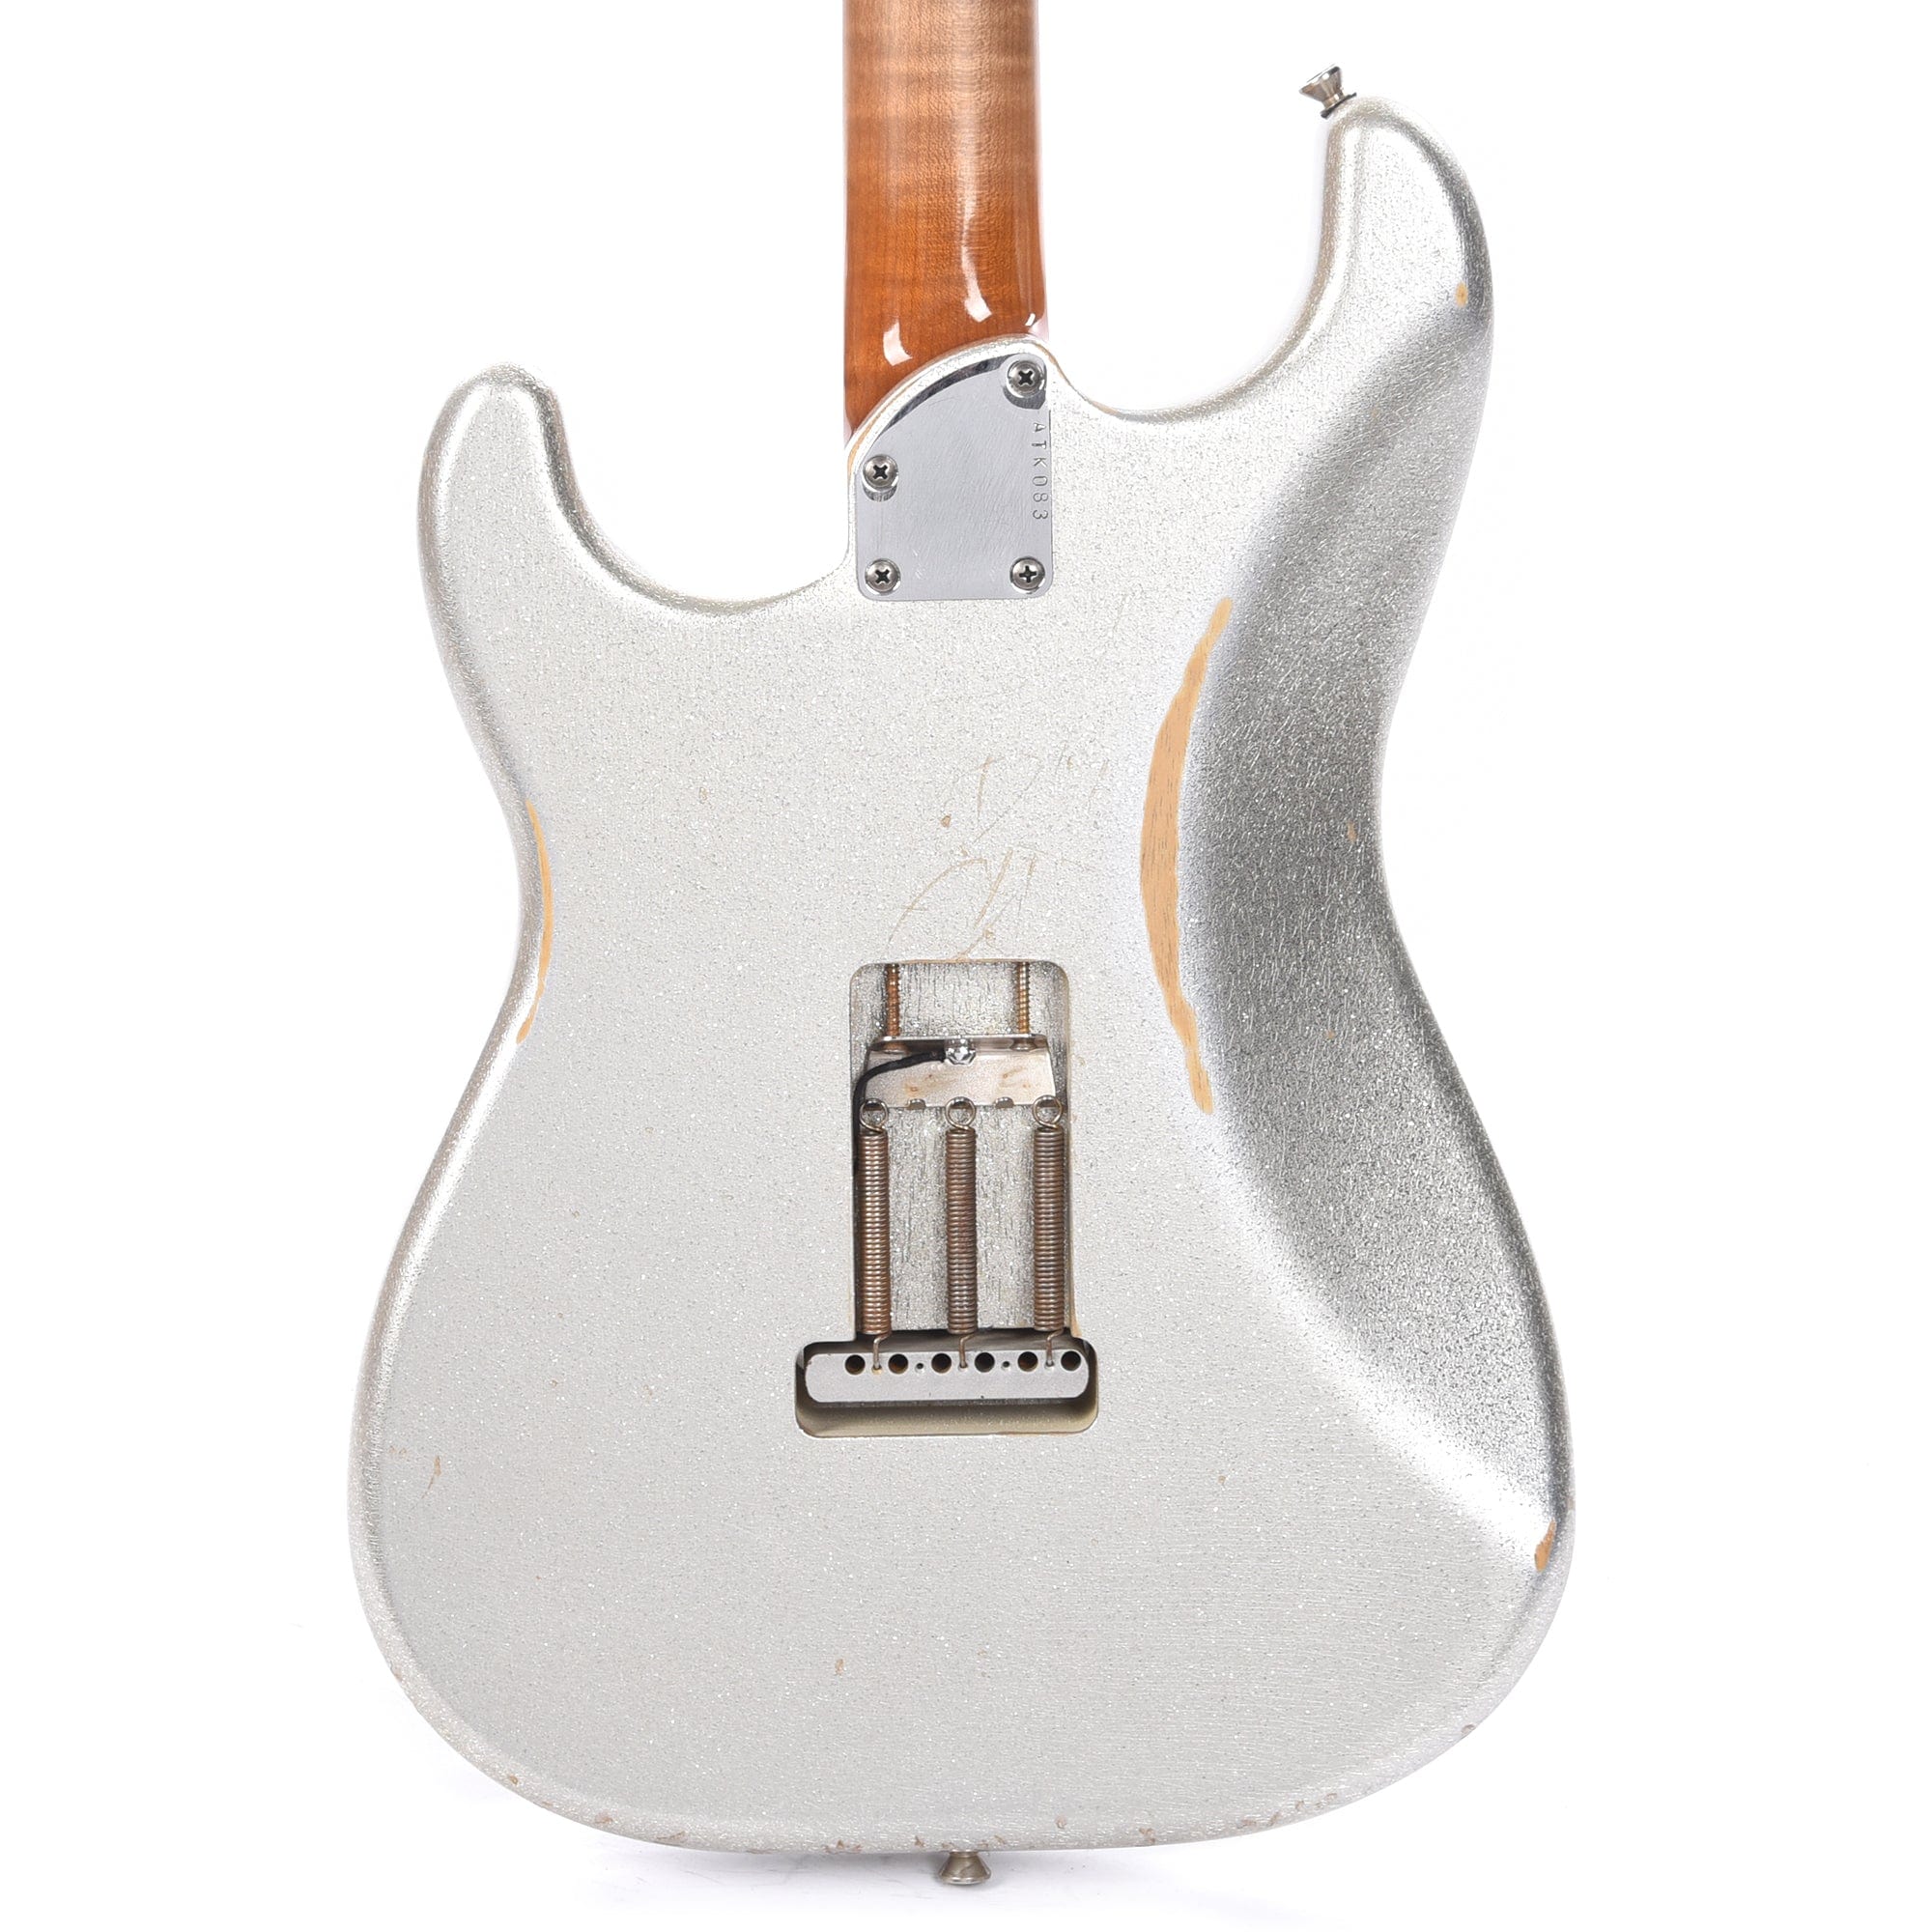 Atkin 63 S-Style Classic Aged Faded Silver Sparkle w/Roasted Flame Maple Neck Electric Guitars / Solid Body